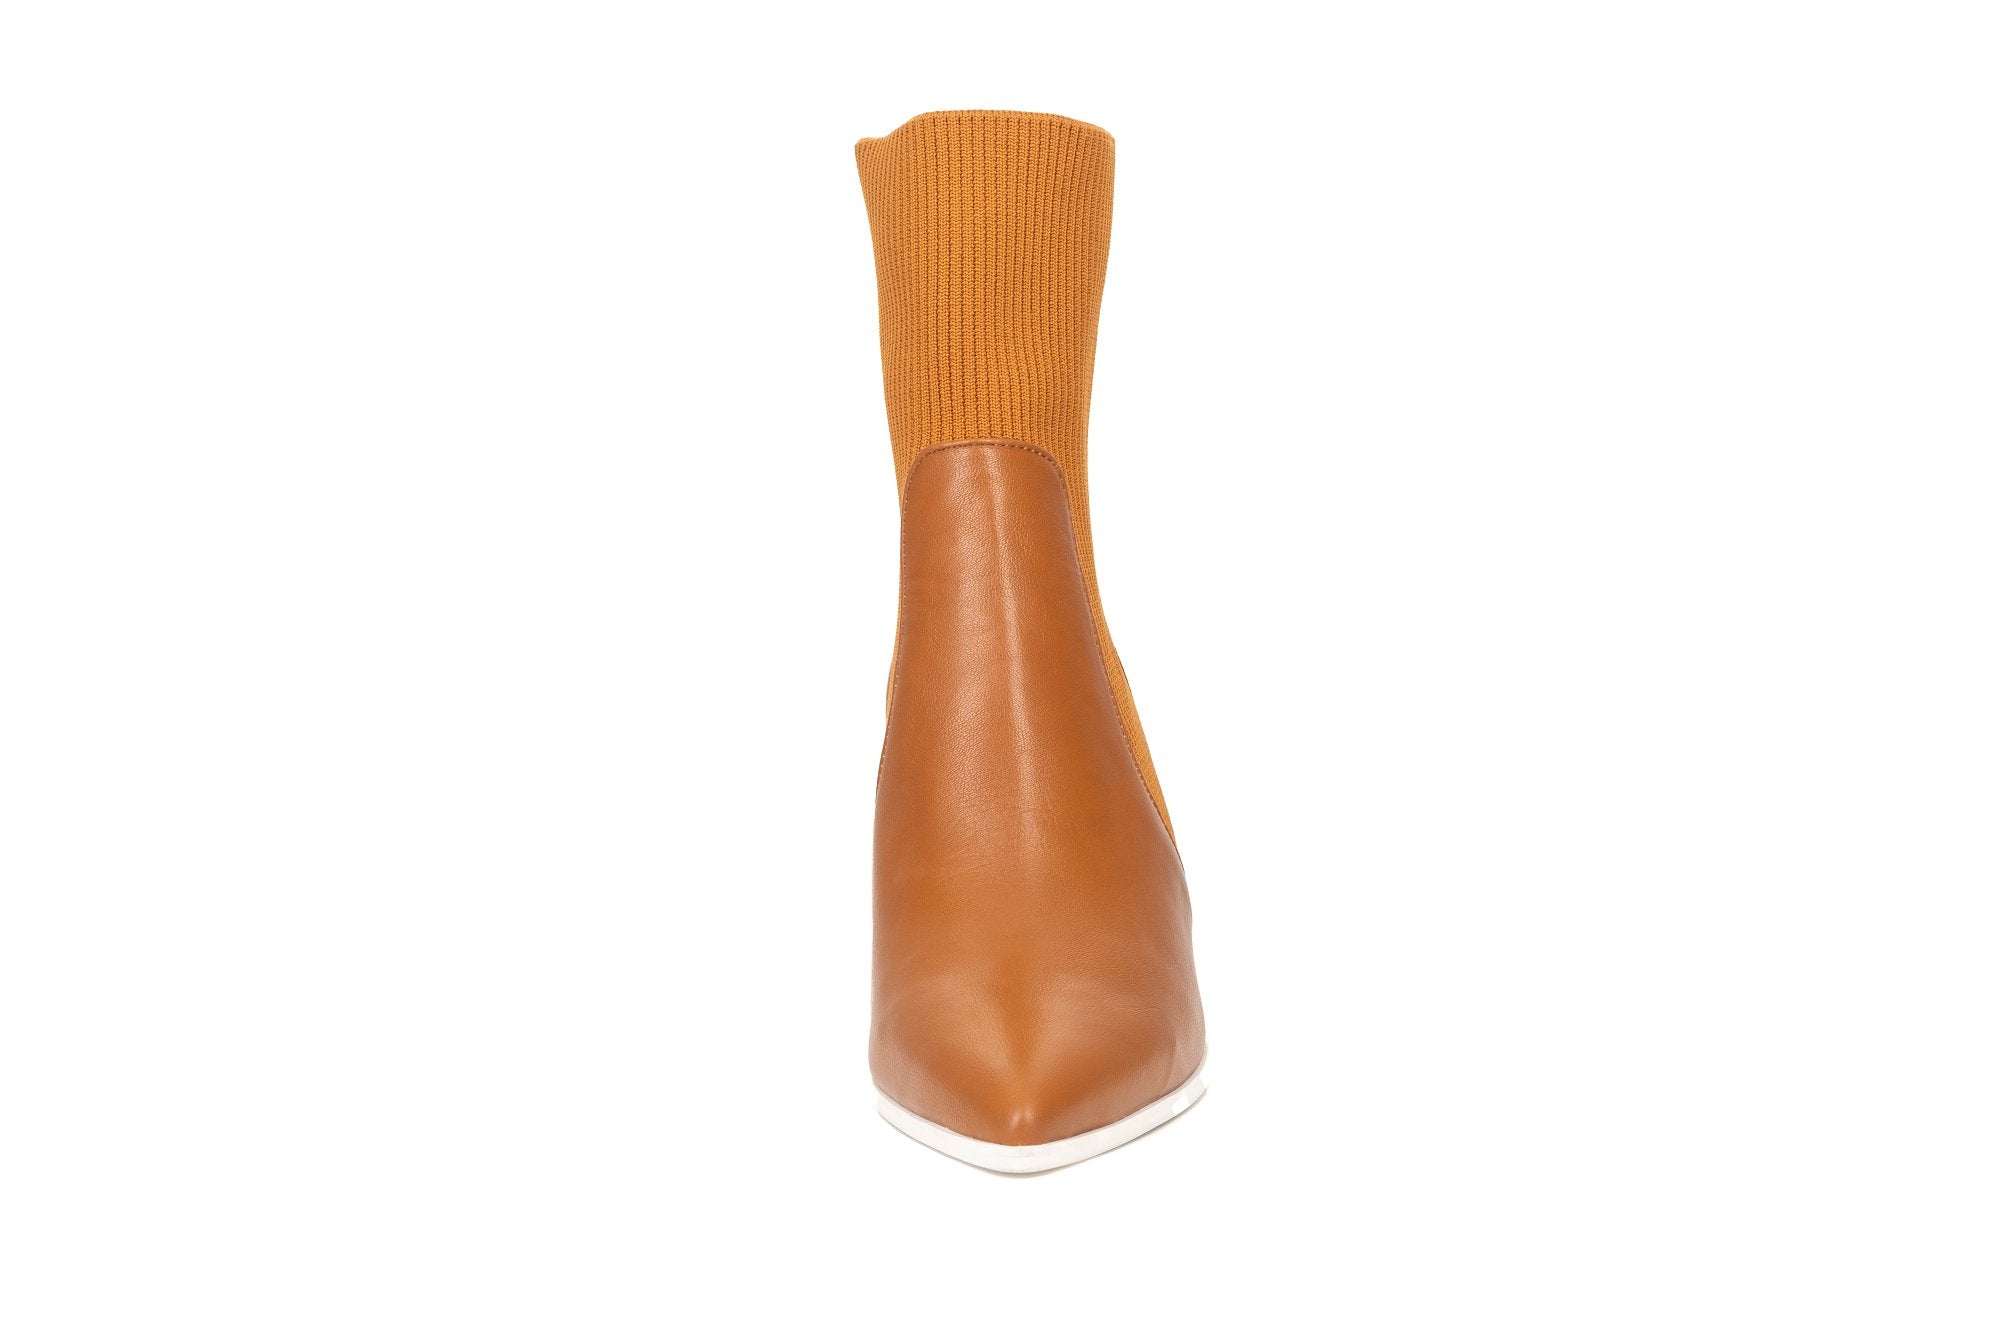 Bal Boot Tan Boots by Sole Shoes NZ AB8-37